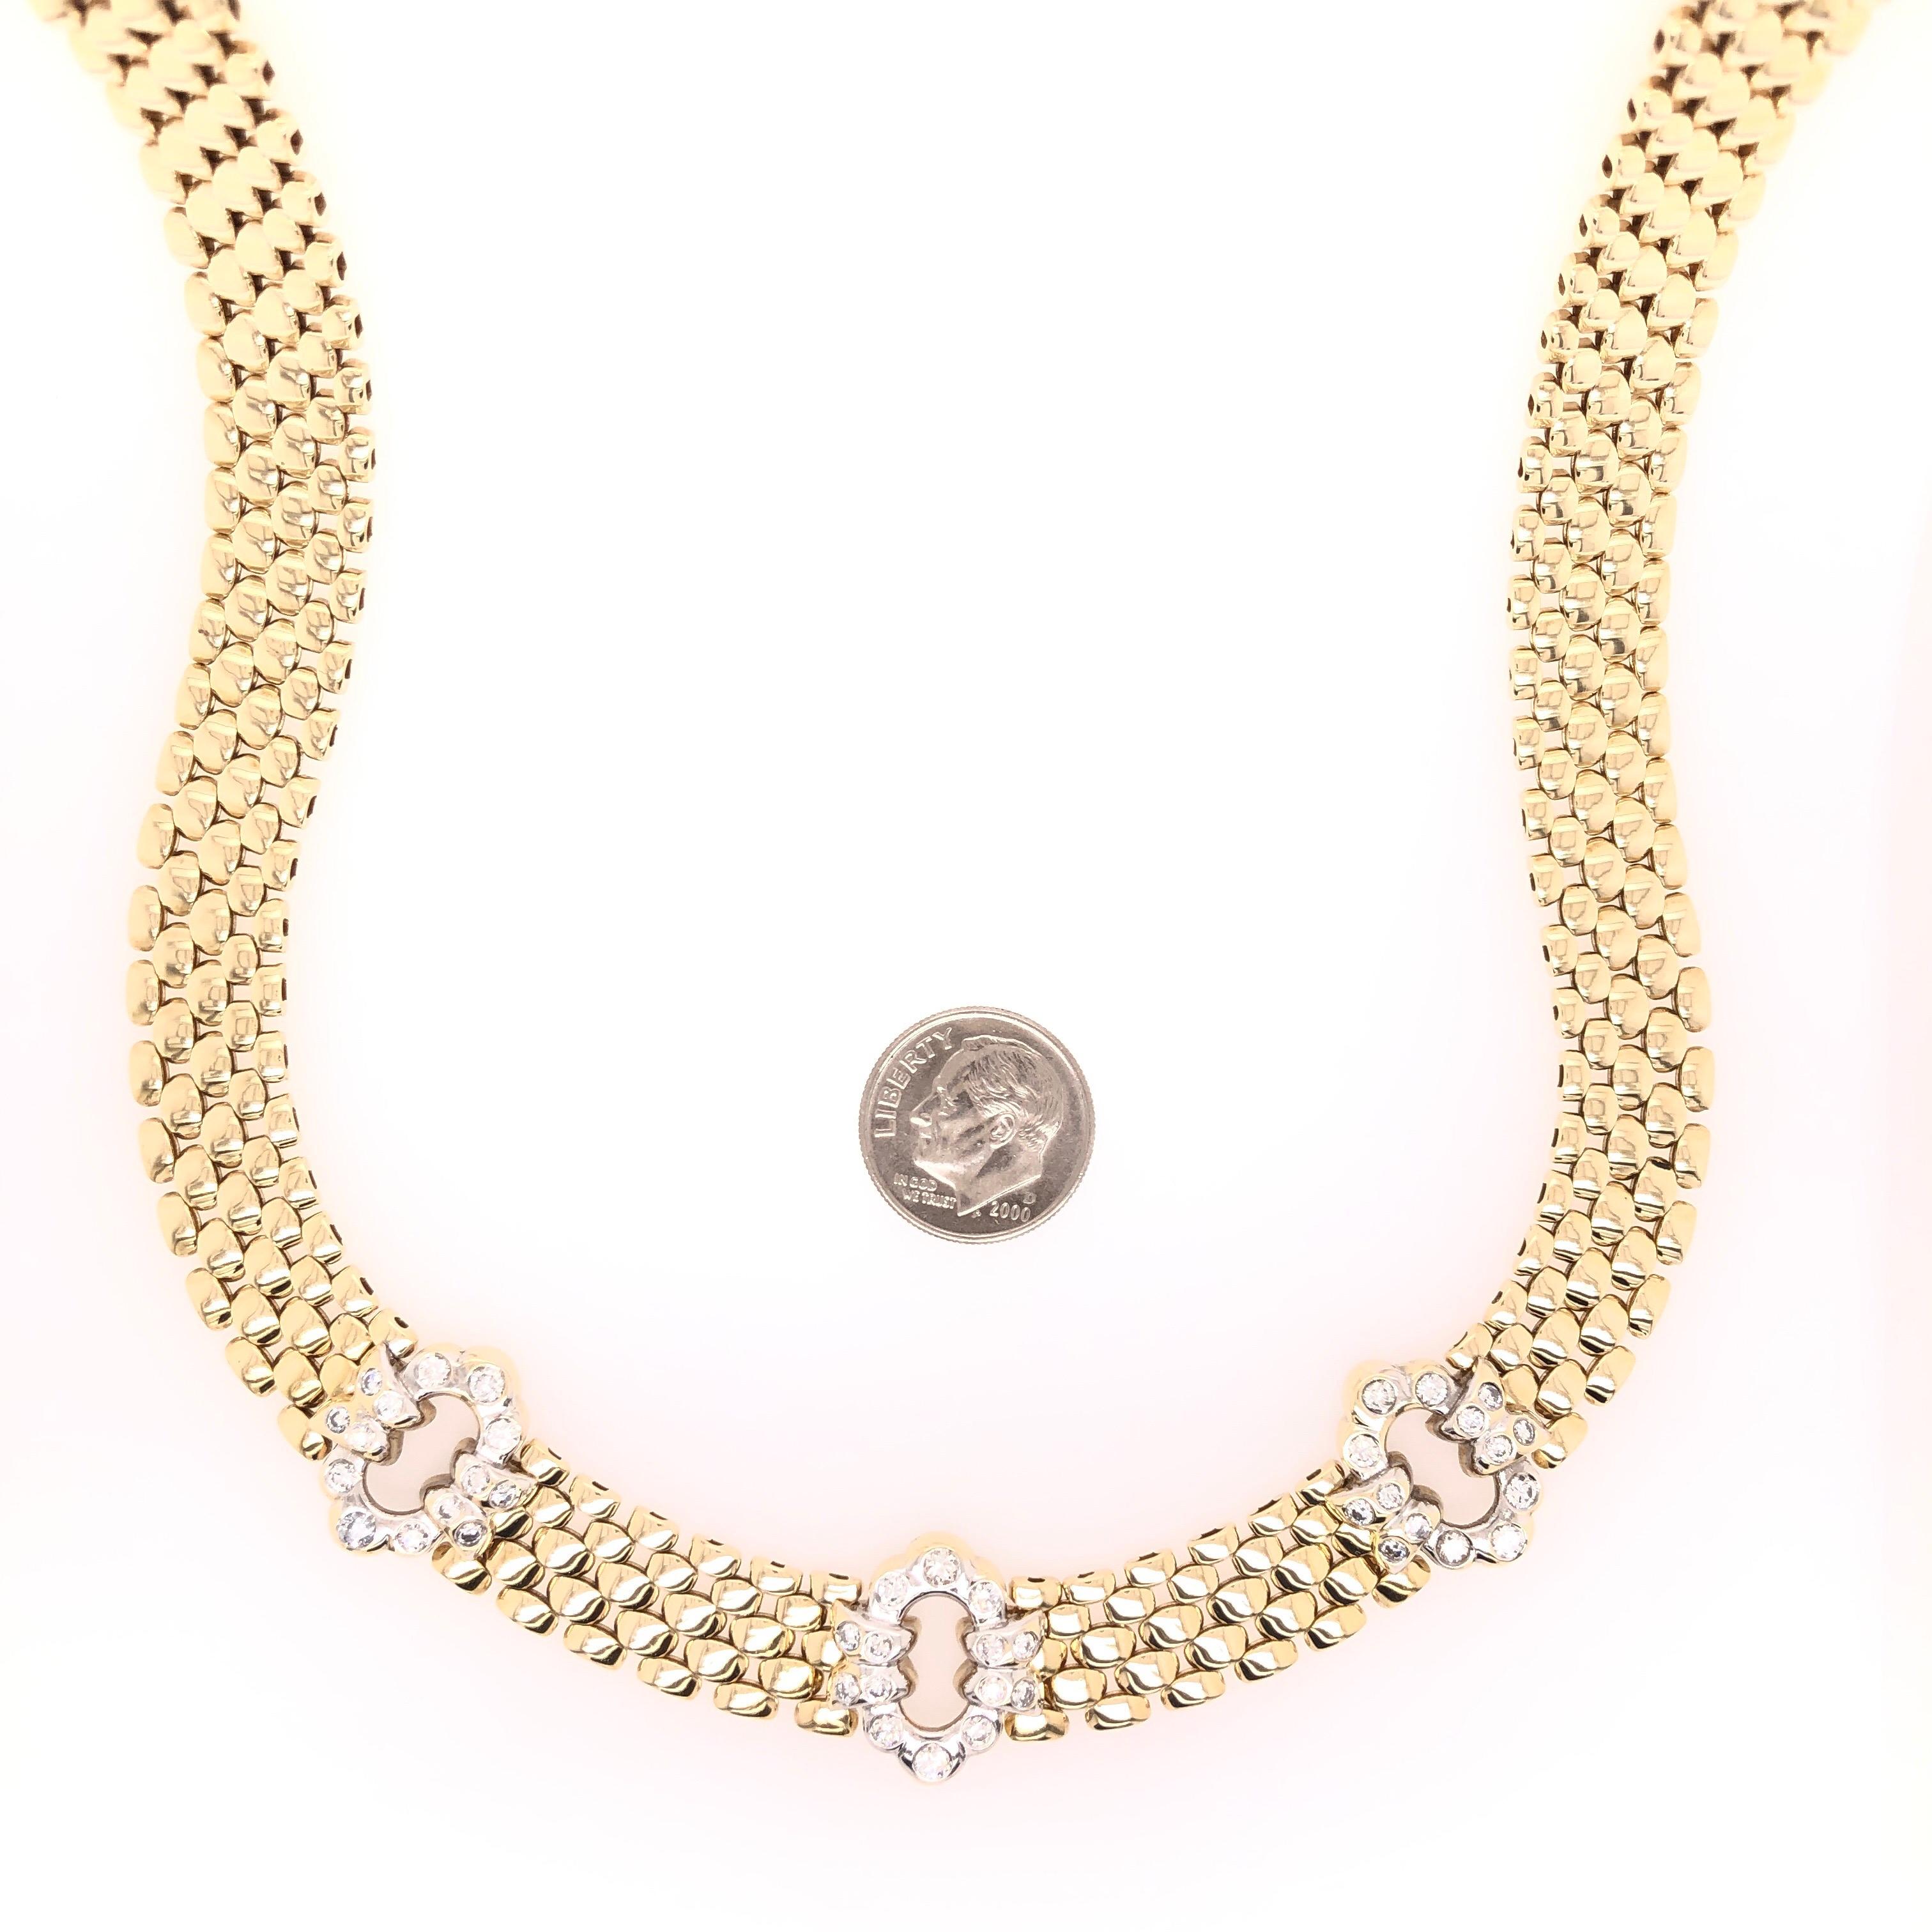 If you love vintage, this necklace is for you! Three flower inspired diamond stations are positioned front and center on a silky 14 karat yellow gold chain. A total estimated weight of 1.43 CTS of round cut diamonds are evenly and symmetrically